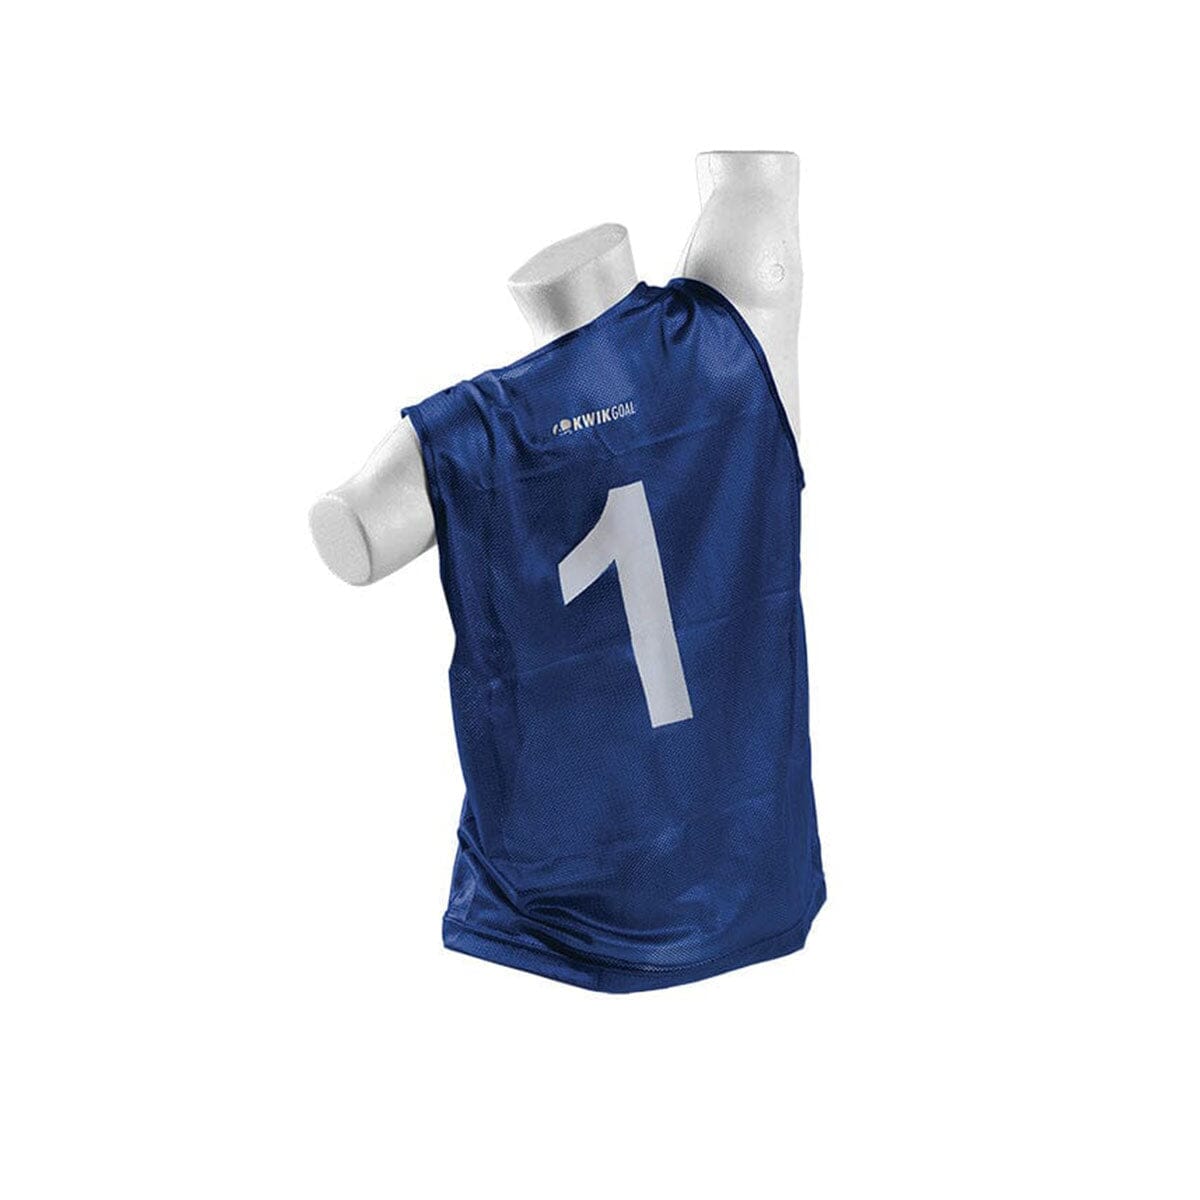 Kwikgoal Numbered Vests 1-18 | 19A9 Training equipment Kwikgoal Youth Royal Blue 